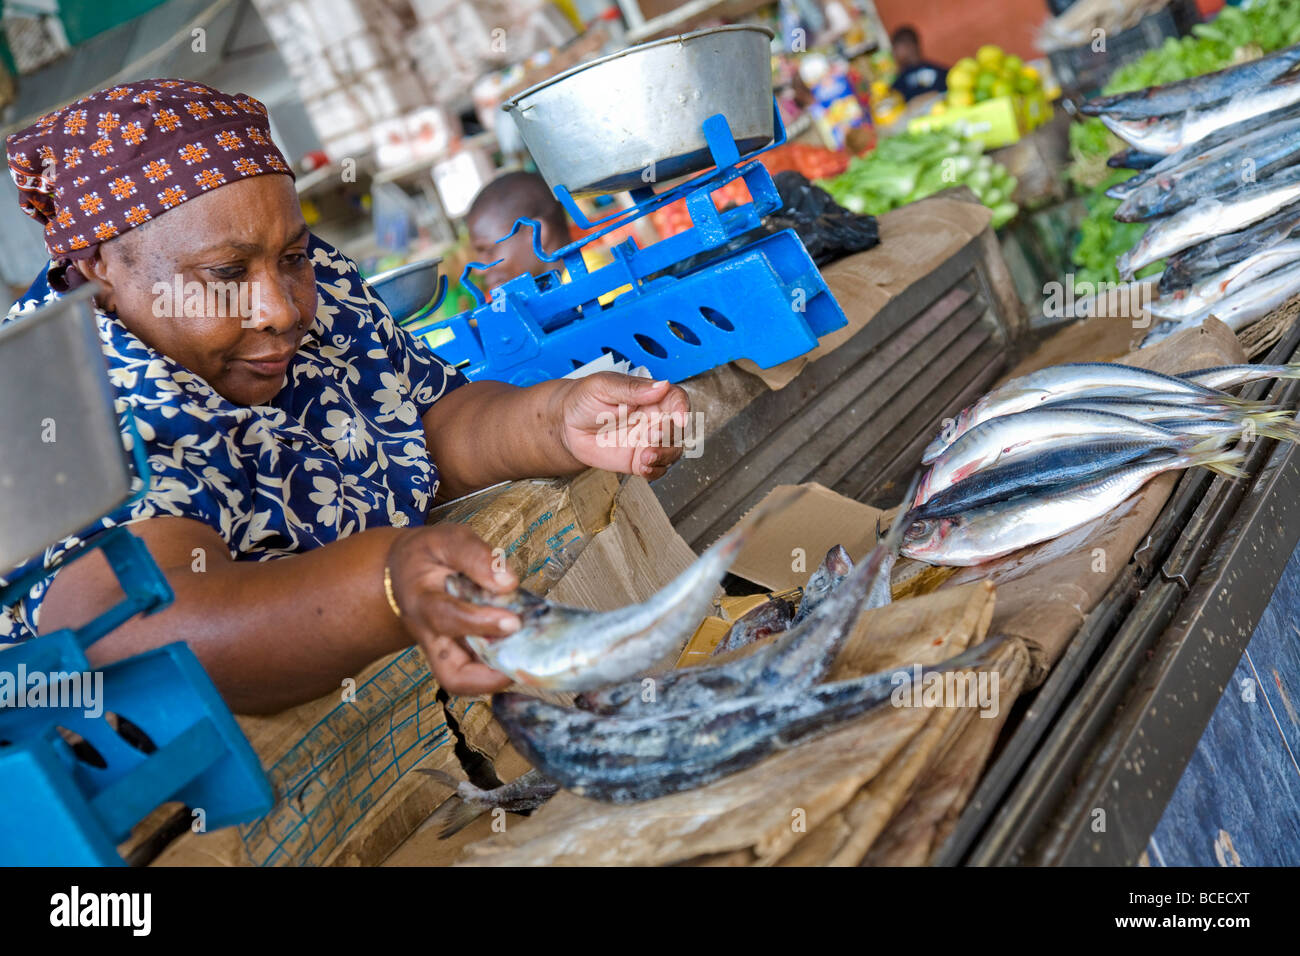 Mozambique, Maputo. A large African lady lays out fresh fish on her stall in the Central Makret in Maputo. Stock Photo